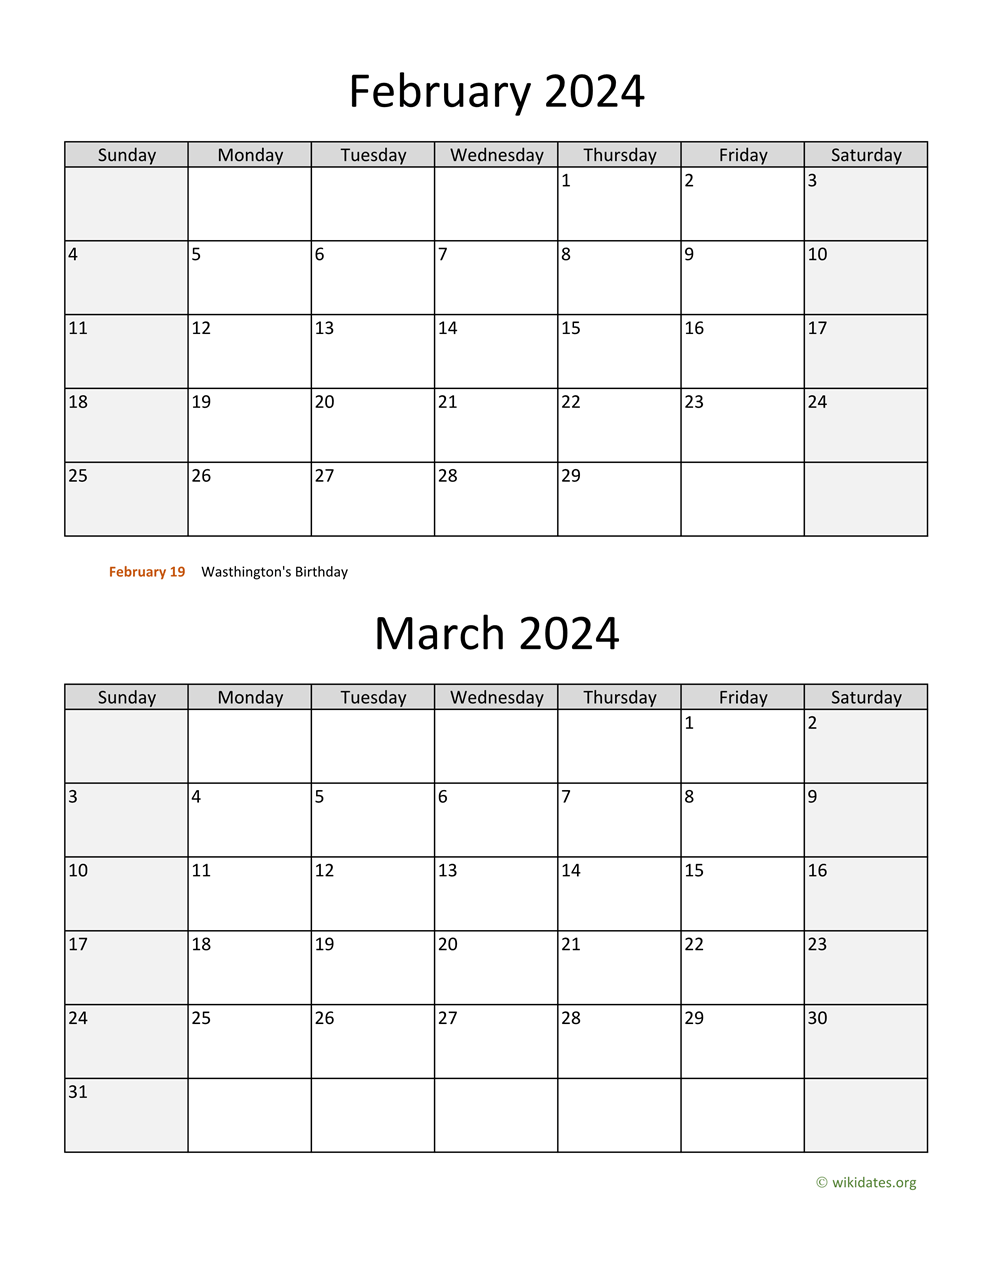 February And March 2024 Calendar | Wikidates for February March 2024 Printable Calendar